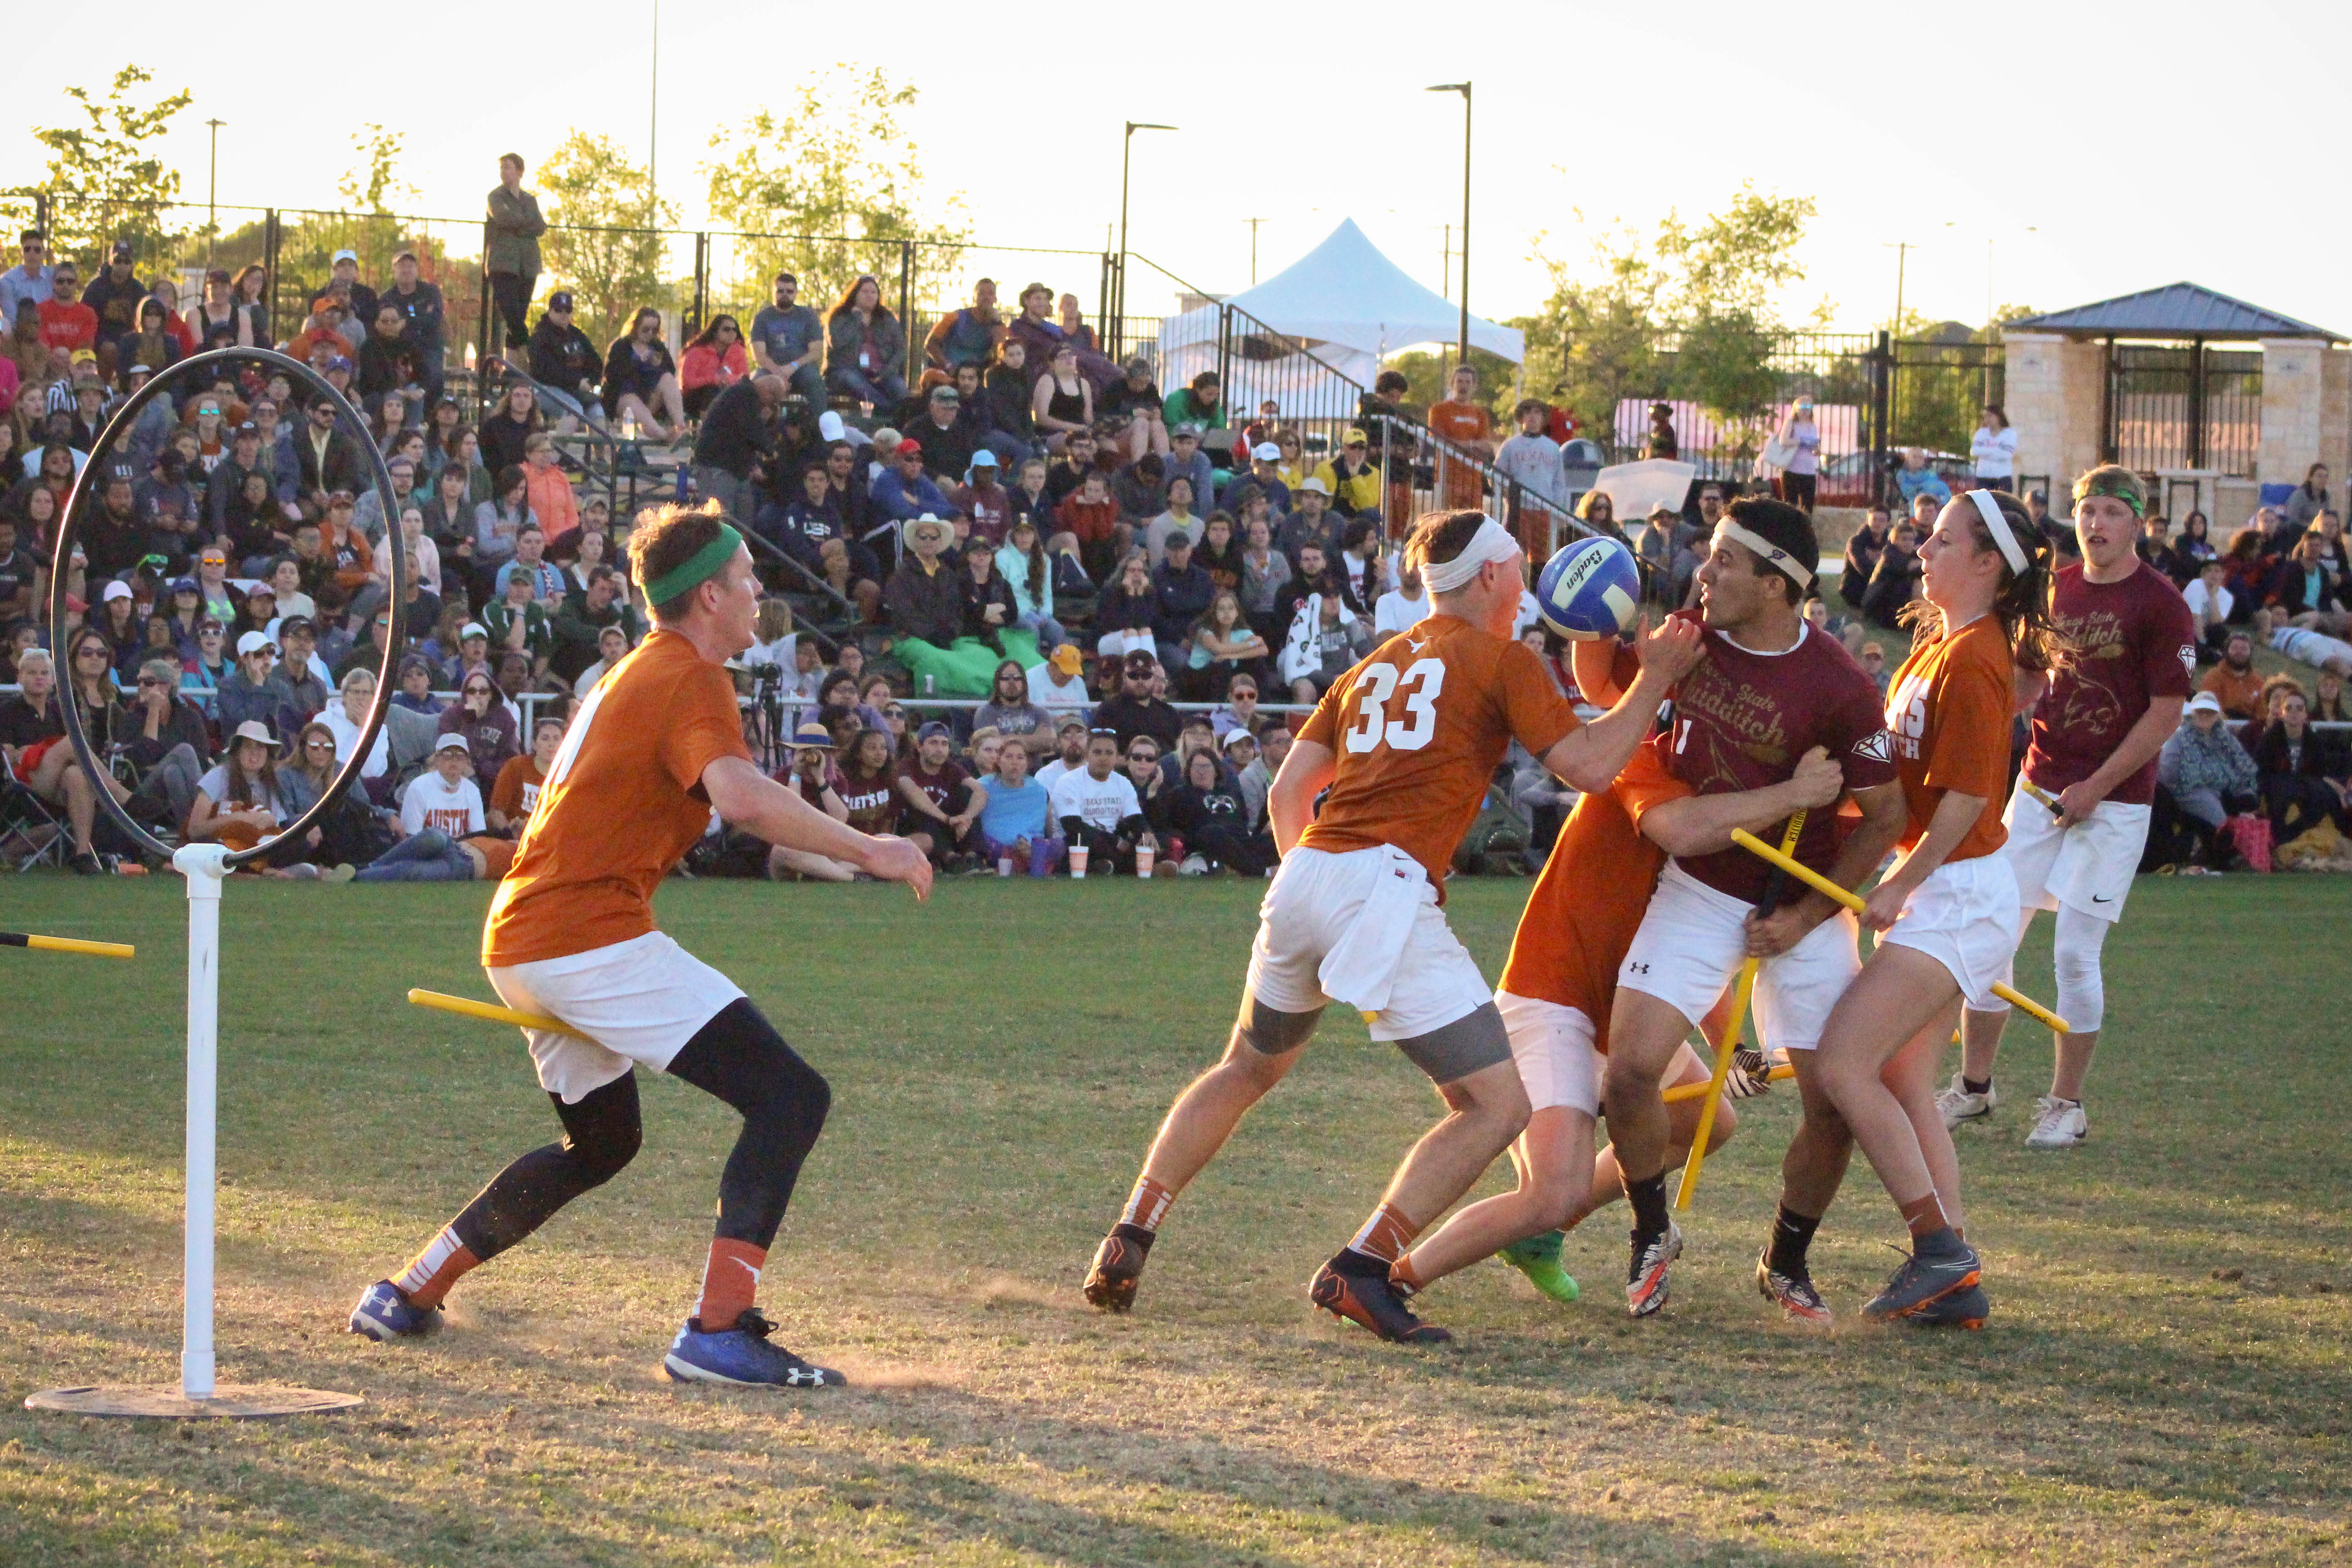 Players on field during a quidditch tournament